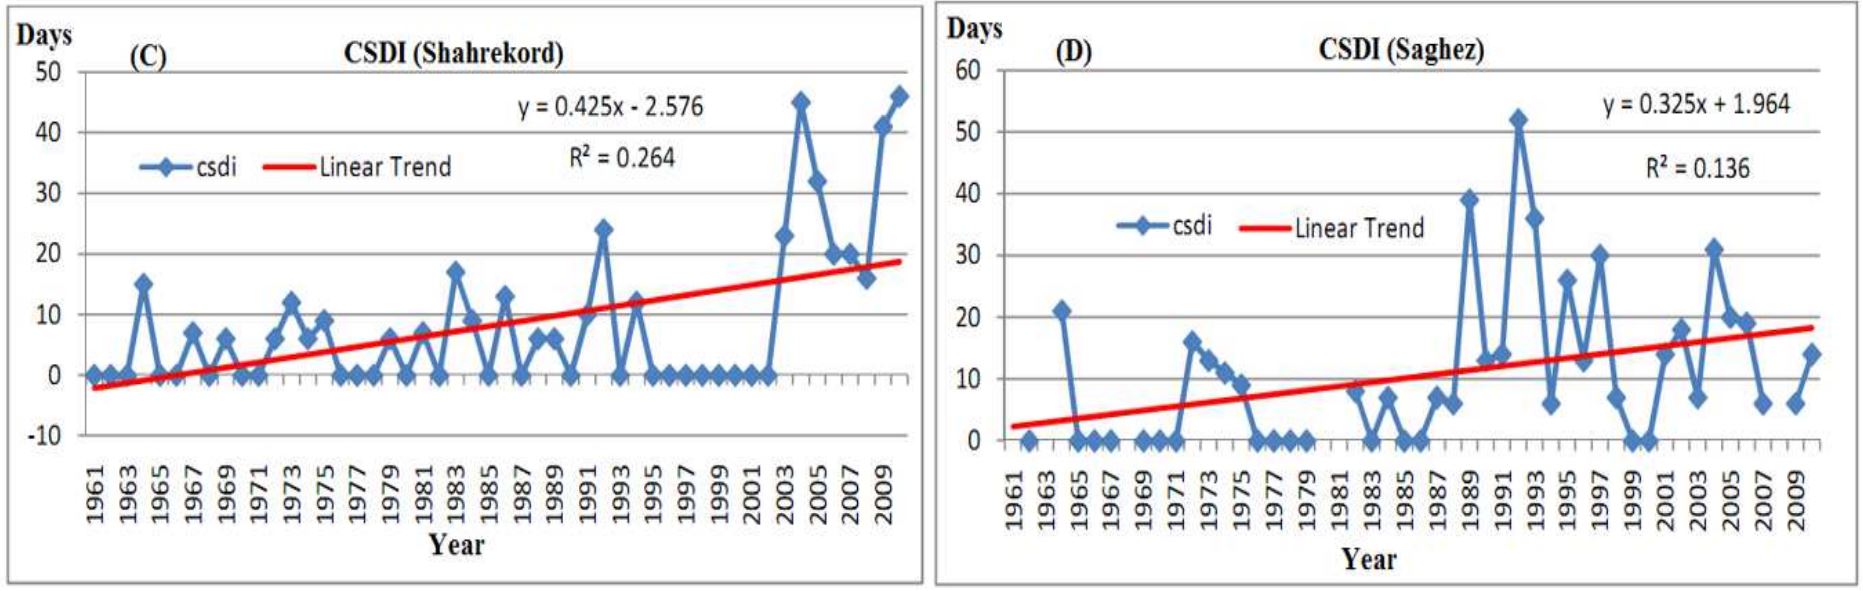 Comparison between time series of CSDI for Shahrekord and Saghez, Iran